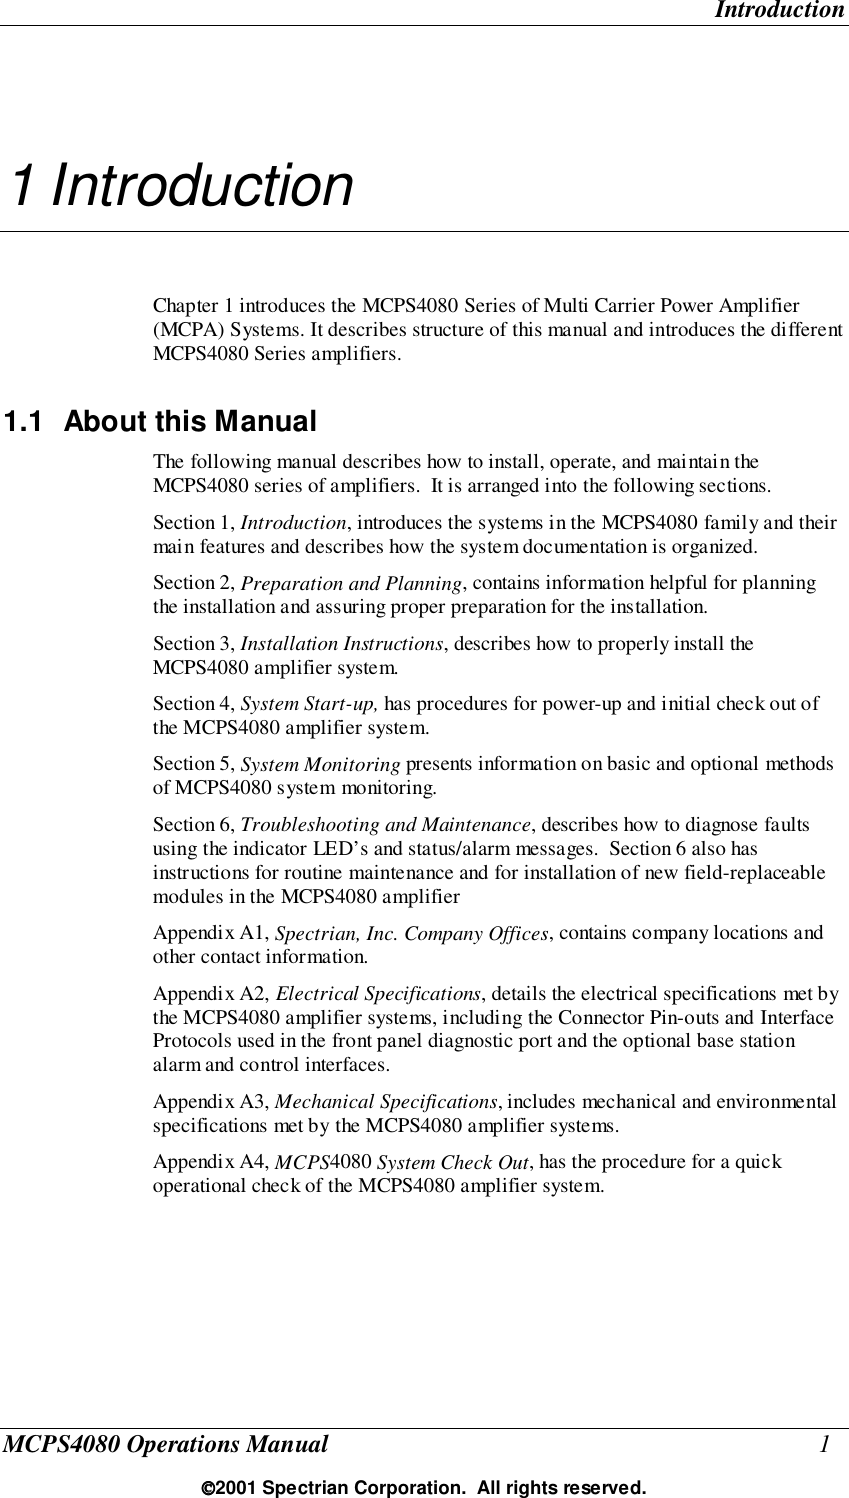 IntroductionMCPS4080 Operations Manual 12001 Spectrian Corporation.  All rights reserved.1 IntroductionChapter 1 introduces the MCPS4080 Series of Multi Carrier Power Amplifier(MCPA) Systems. It describes structure of this manual and introduces the differentMCPS4080 Series amplifiers.1.1  About this ManualThe following manual describes how to install, operate, and maintain theMCPS4080 series of amplifiers.  It is arranged into the following sections.Section 1, Introduction, introduces the systems in the MCPS4080 family and theirmain features and describes how the system documentation is organized.Section 2, Preparation and Planning, contains information helpful for planningthe installation and assuring proper preparation for the installation.Section 3, Installation Instructions, describes how to properly install theMCPS4080 amplifier system.Section 4, System Start-up, has procedures for power-up and initial check out ofthe MCPS4080 amplifier system.Section 5, System Monitoring presents information on basic and optional methodsof MCPS4080 system monitoring.Section 6, Troubleshooting and Maintenance, describes how to diagnose faultsusing the indicator LED’s and status/alarm messages.  Section 6 also hasinstructions for routine maintenance and for installation of new field-replaceablemodules in the MCPS4080 amplifierAppendix A1, Spectrian, Inc. Company Offices, contains company locations andother contact information.Appendix A2, Electrical Specifications, details the electrical specifications met bythe MCPS4080 amplifier systems, including the Connector Pin-outs and InterfaceProtocols used in the front panel diagnostic port and the optional base stationalarm and control interfaces.Appendix A3, Mechanical Specifications, includes mechanical and environmentalspecifications met by the MCPS4080 amplifier systems.Appendix A4, MCPS4080 System Check Out, has the procedure for a quickoperational check of the MCPS4080 amplifier system.